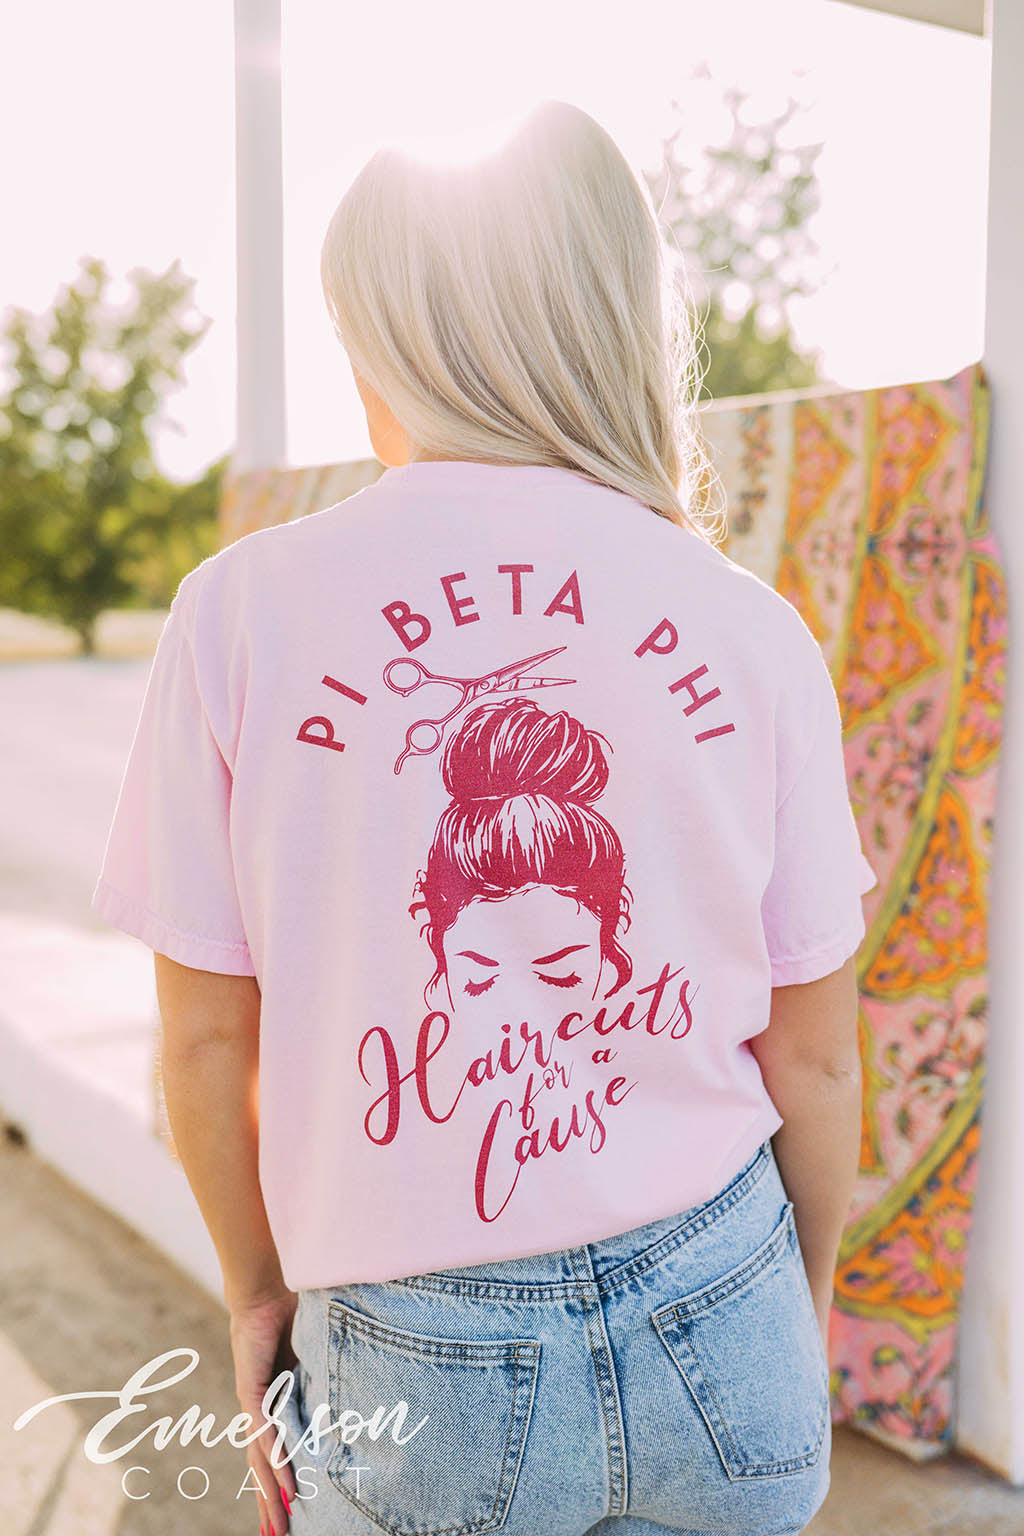 Pi Beta Phi Philanthropy Haircuts For A Cause Tee